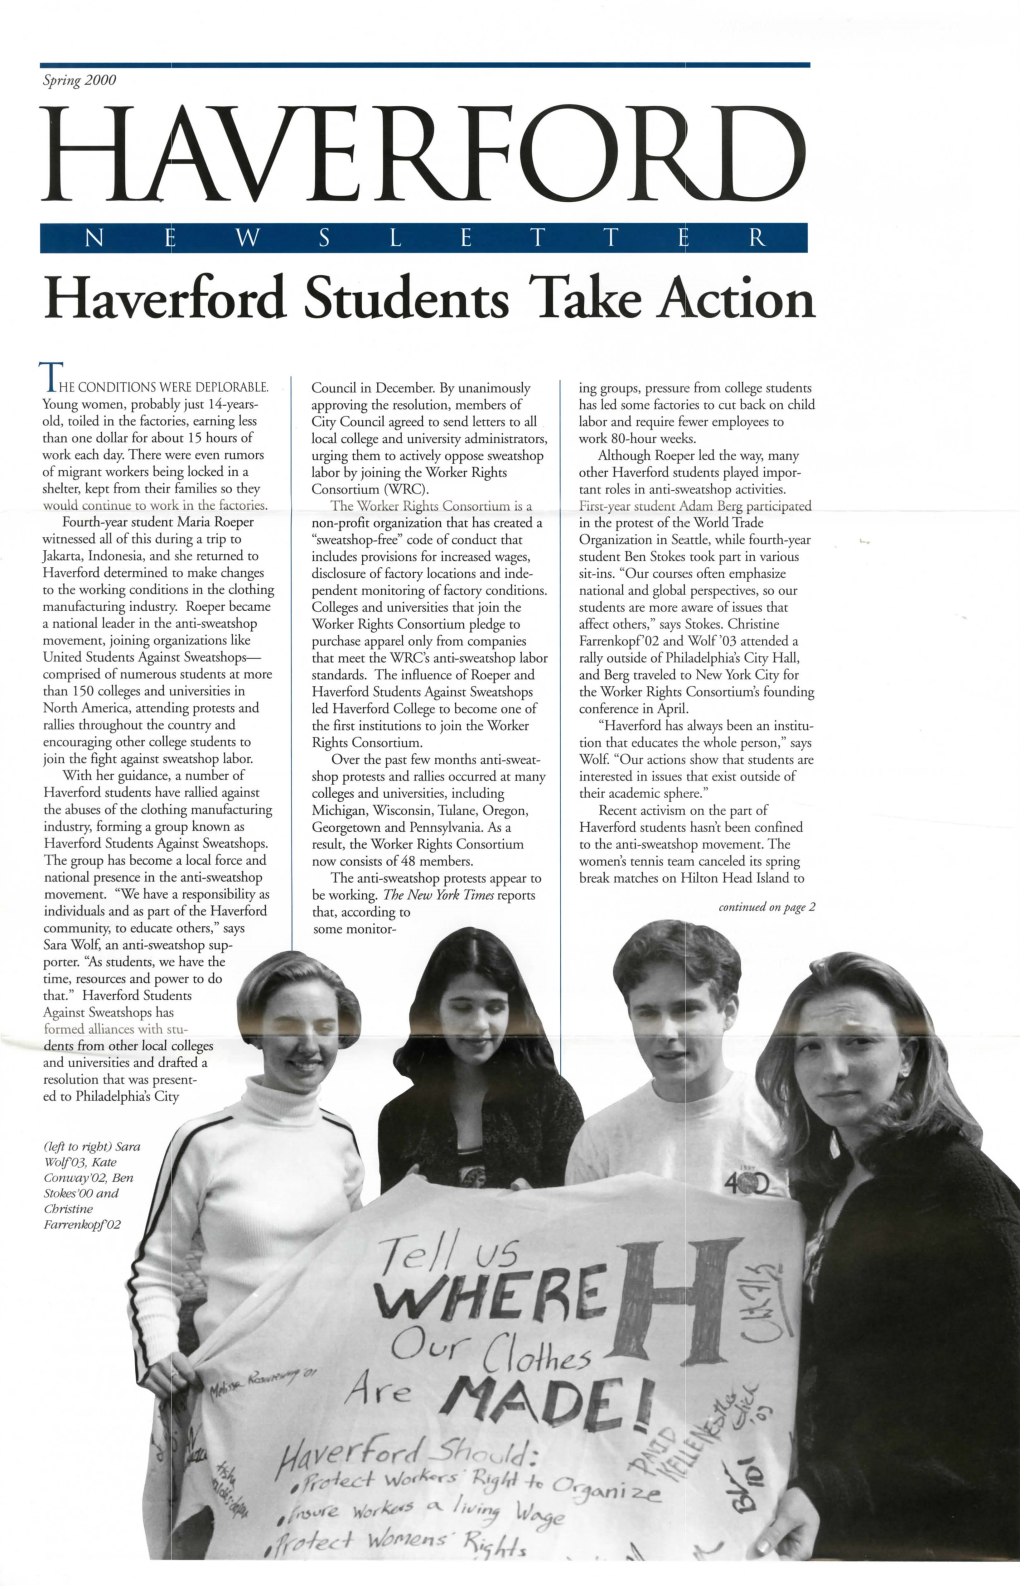 Haverford Students Take Action